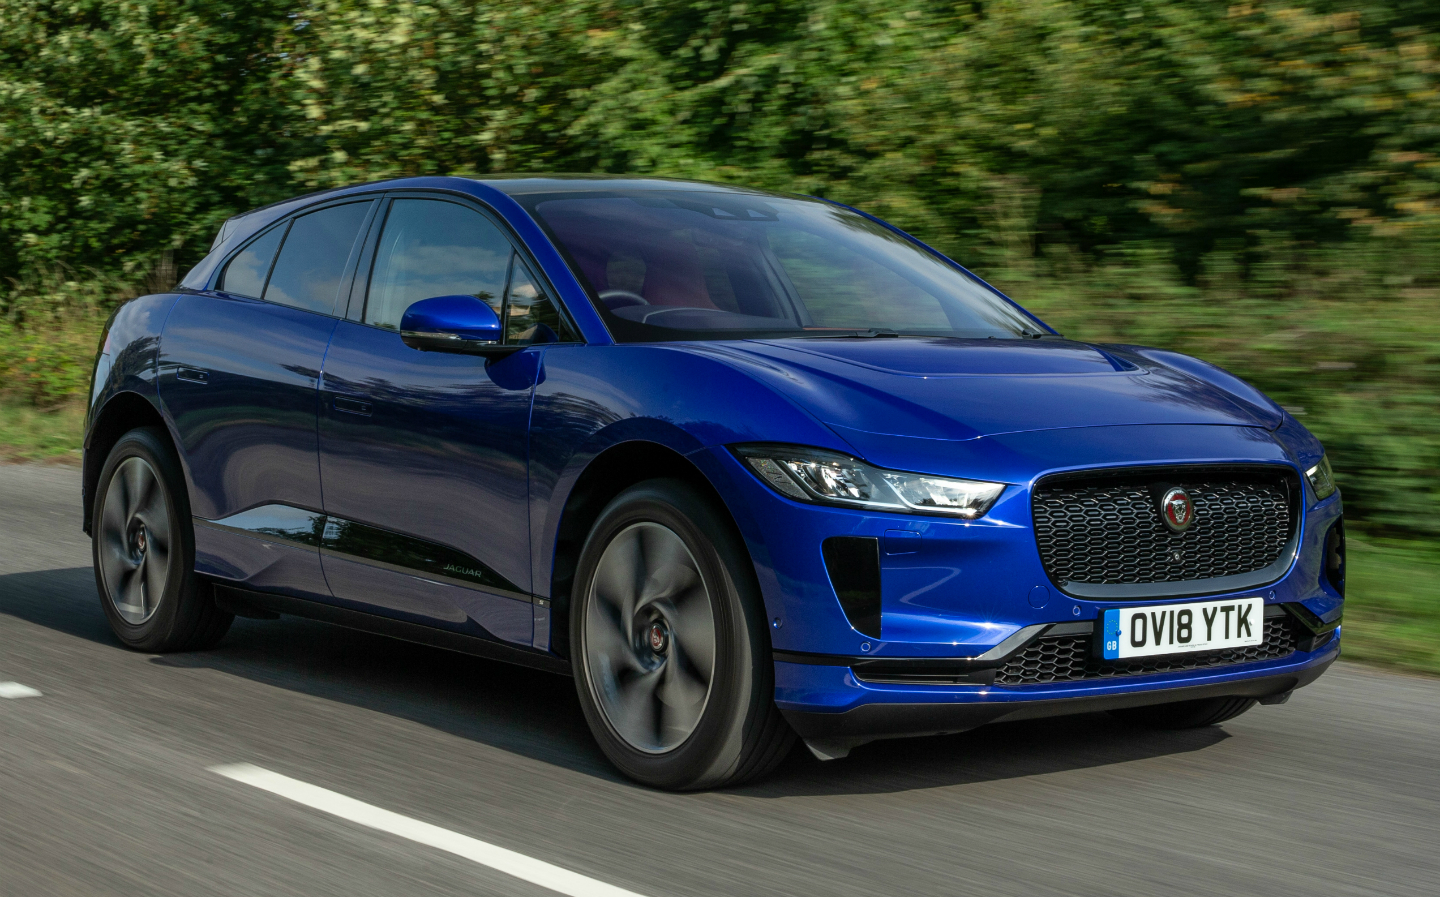 Pure-electric Jaguar I-Pace can now go even further on a charge